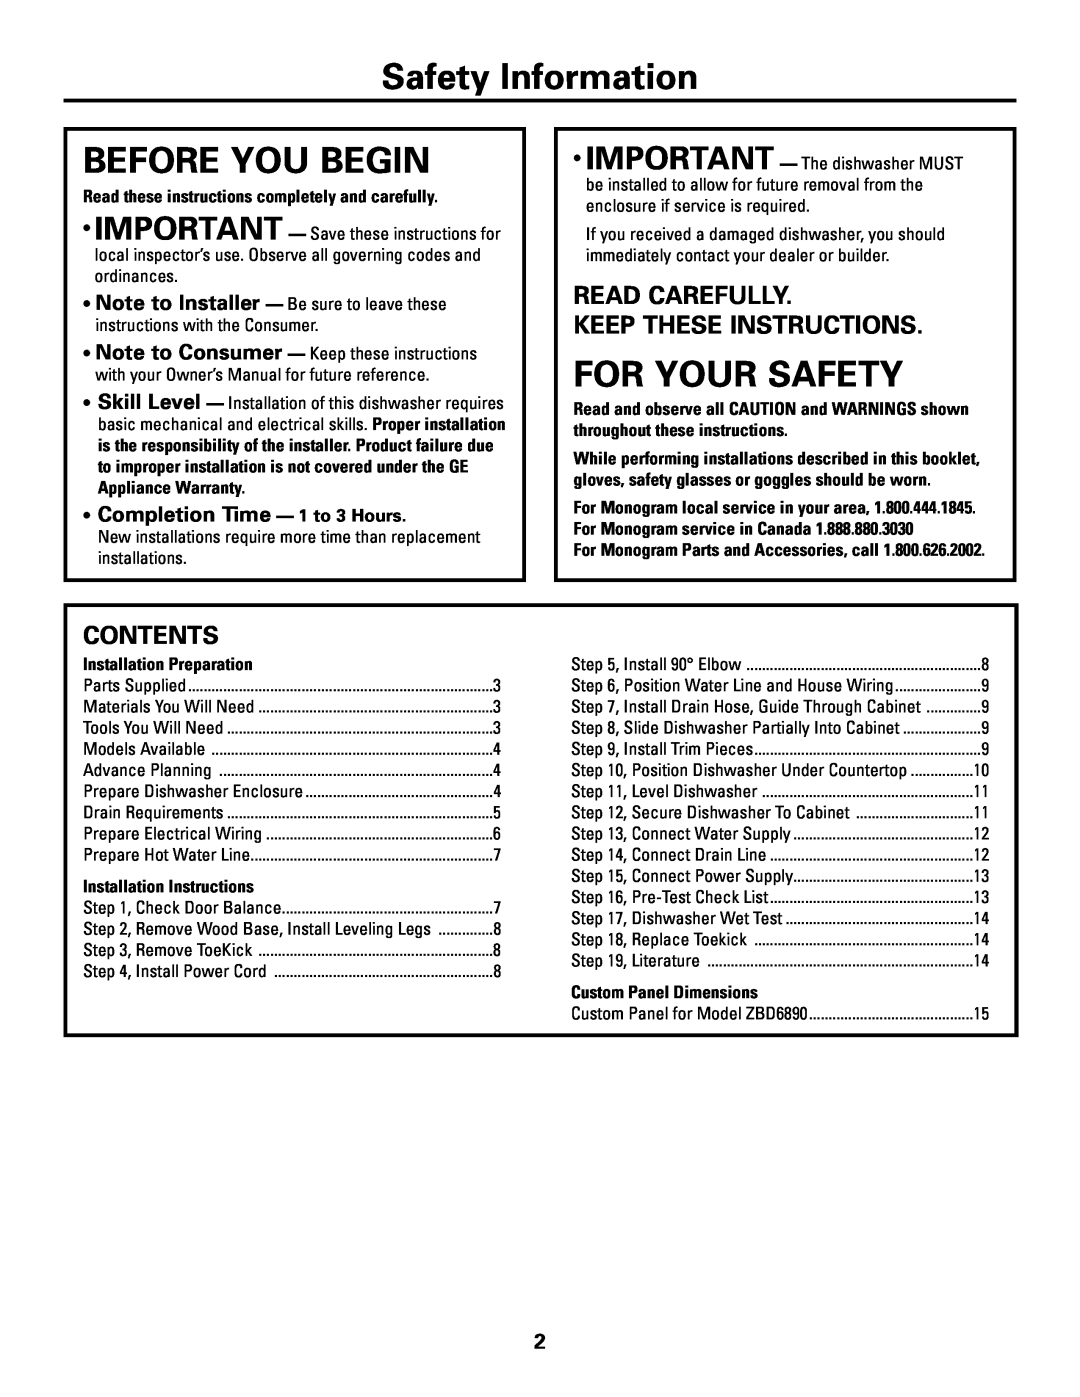 GE Monogram ZBD6890K Safety Information, Before You Begin, For Your Safety, Read Carefully Keep These Instructions 